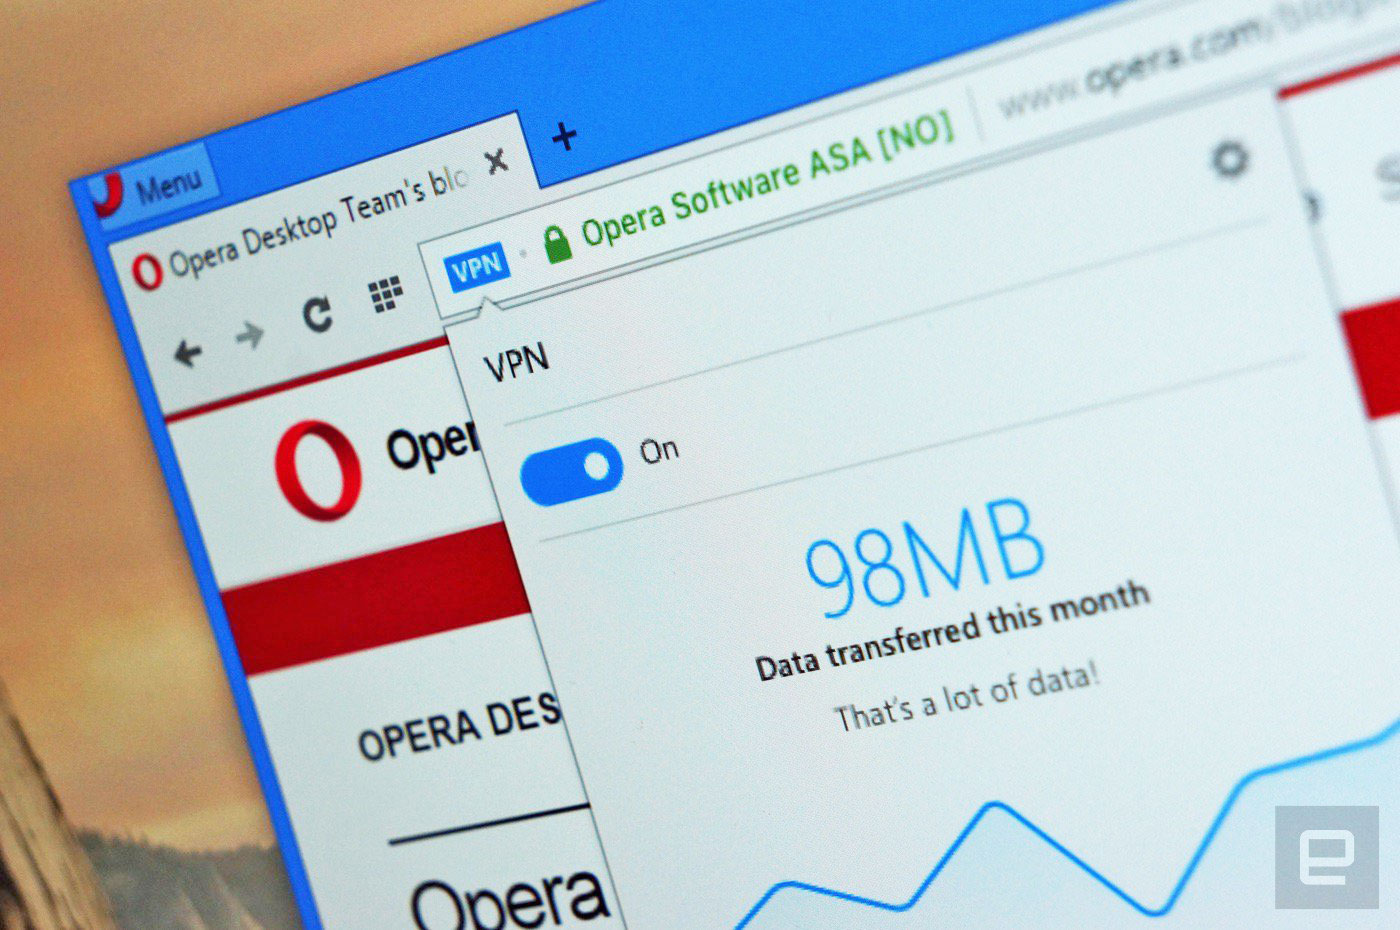 Is Opera a Chinese browser?